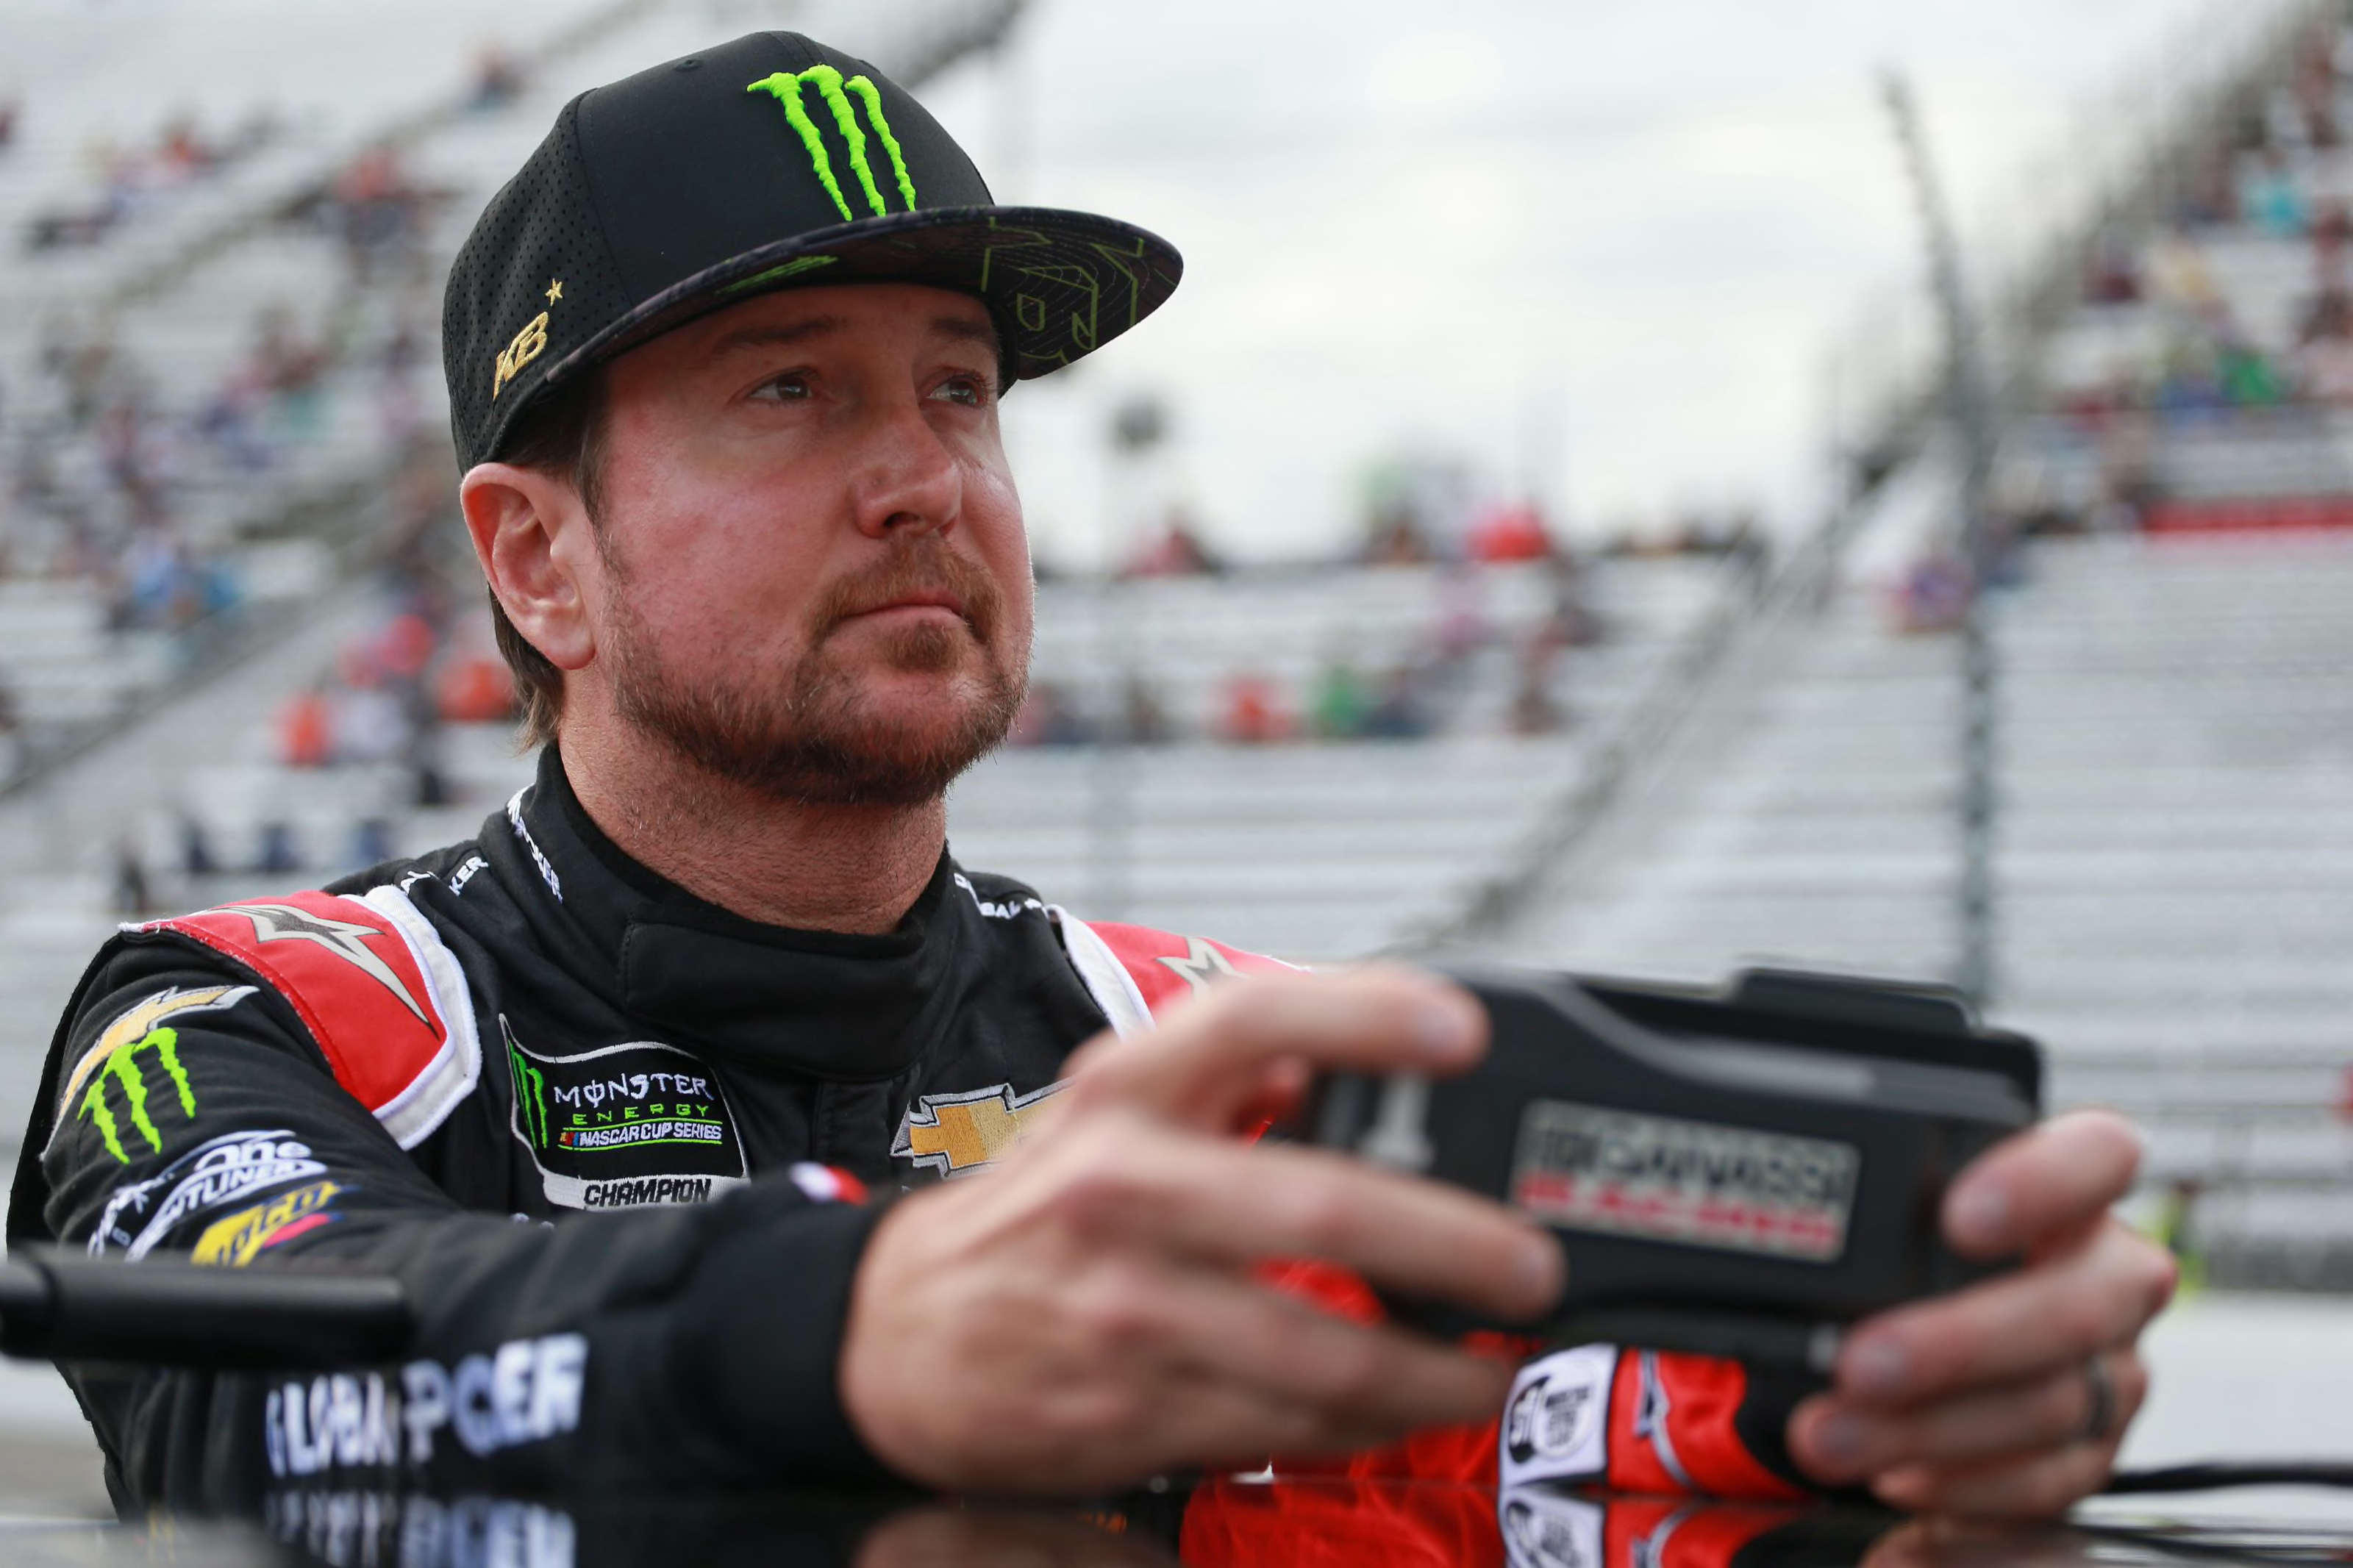 How Many Nascar Drivers Are From Virginia